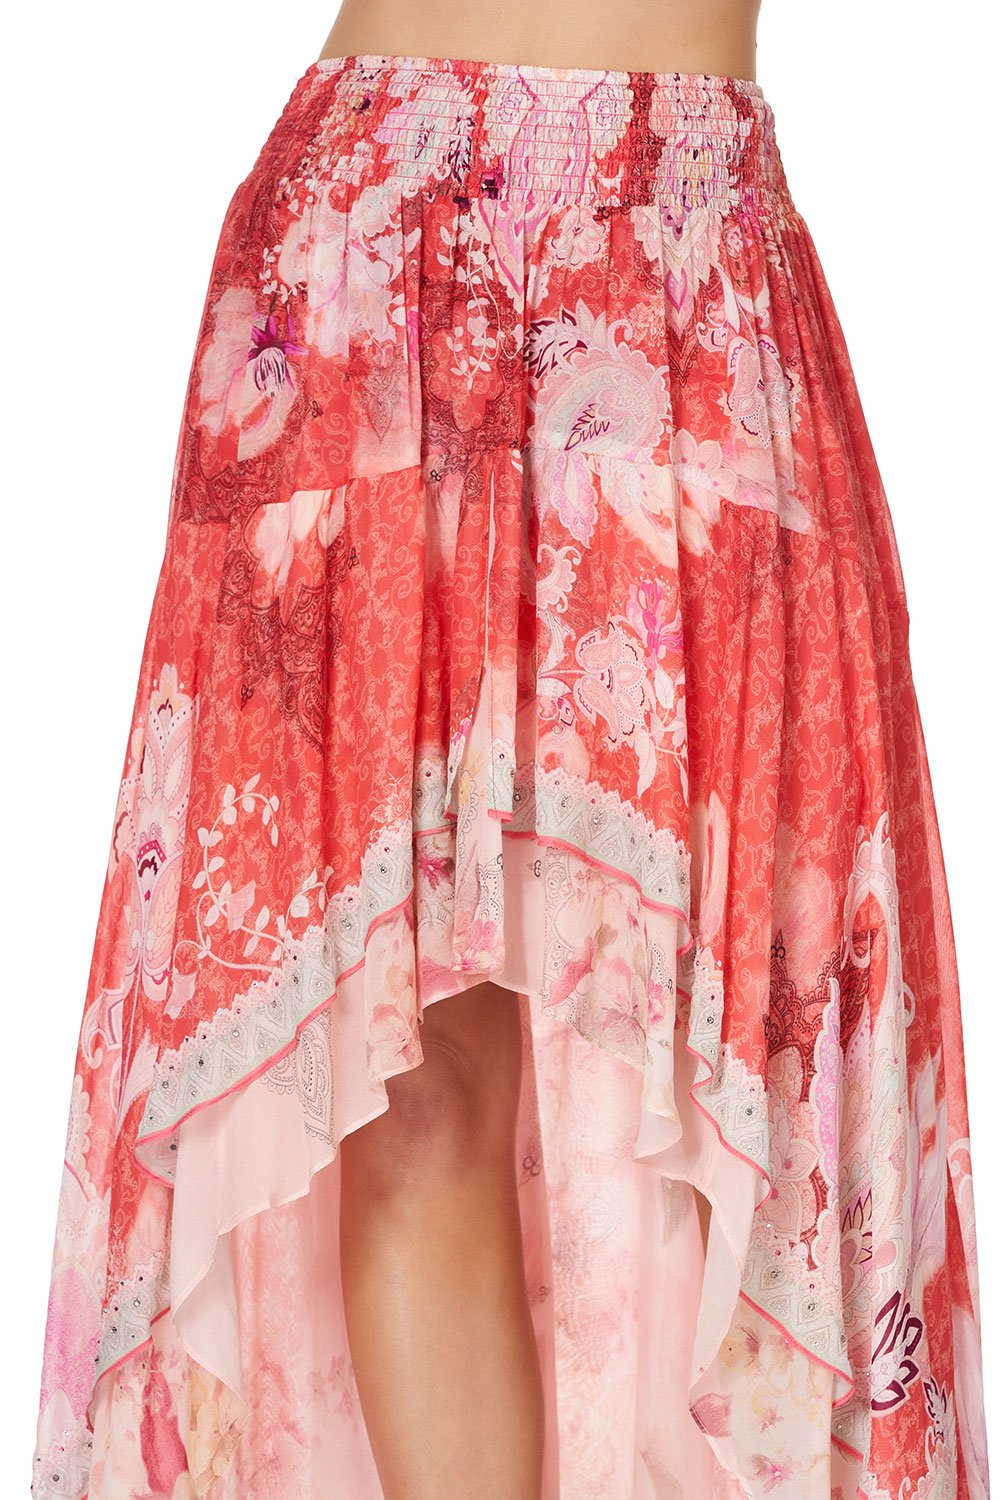 SKIRT WITH DOUBLE LAYER HEM PALACE MUSE